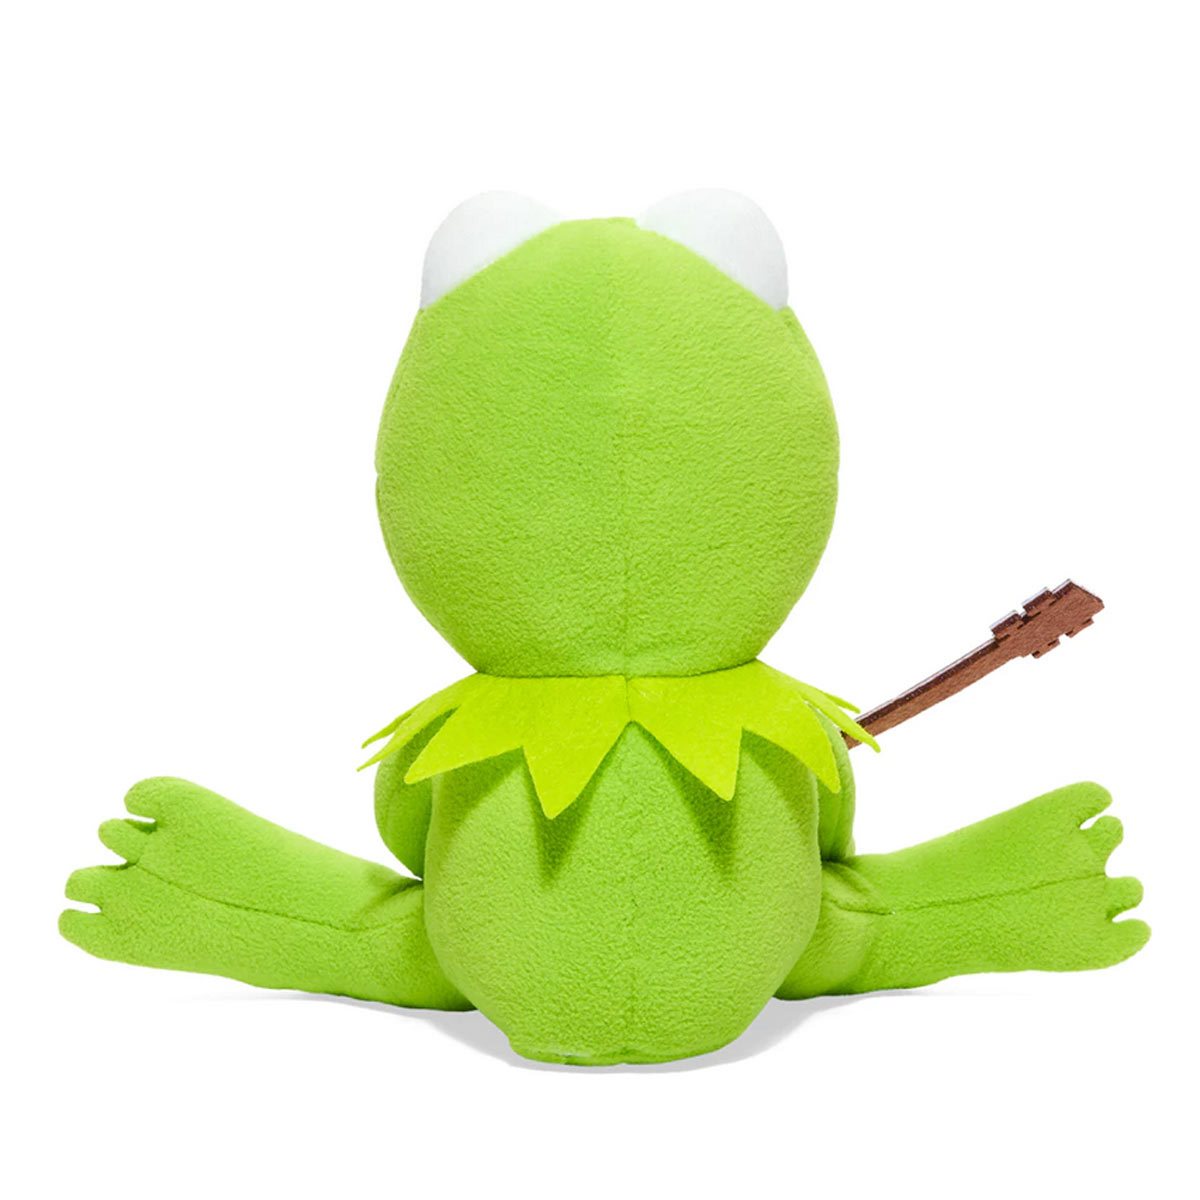 Muppets Kermit the Frog Plush Toy, 18, Best Made Toys